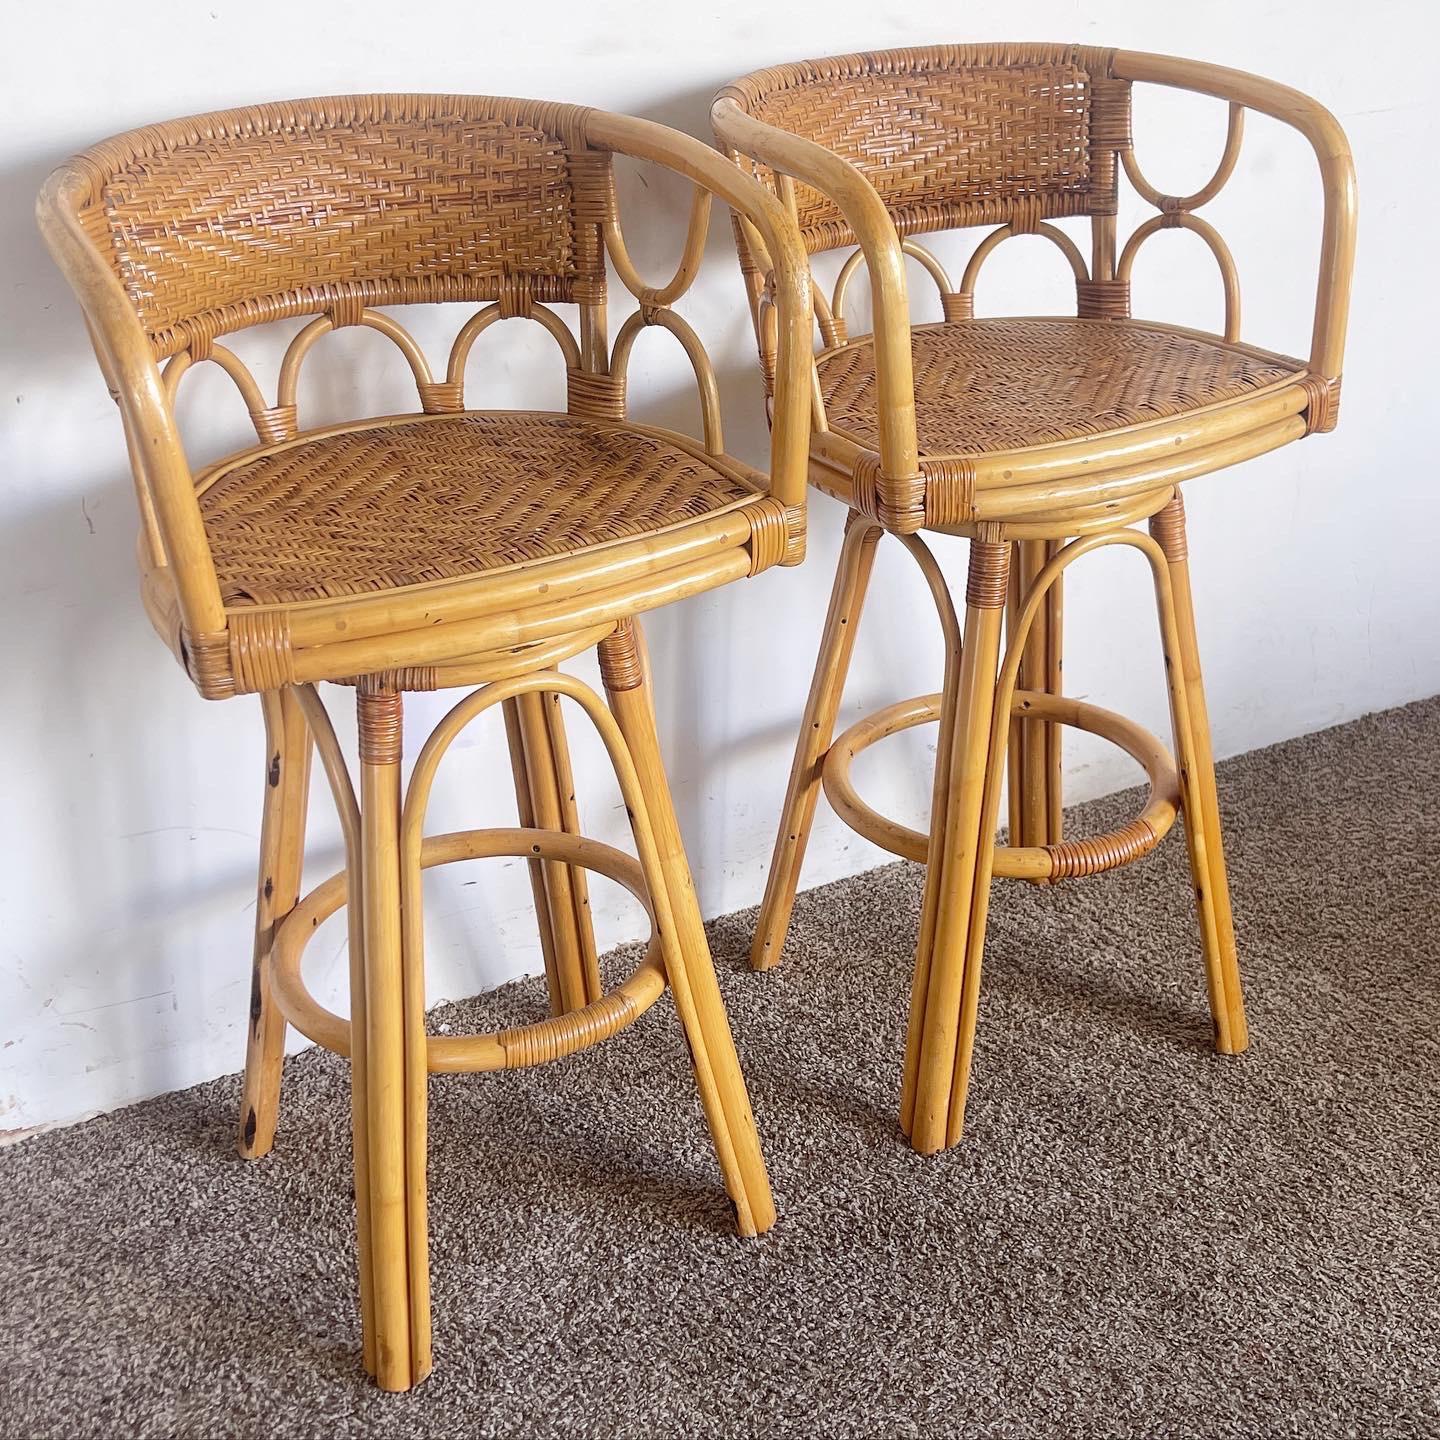 Add casual elegance with the Bamboo Rattan Wicker Swivel Stools, a pair designed to bring Boho Chic flair and functionality to your home.

Constructed with bamboo legs and rattan woven seats for a natural, tropical appeal.
Wicker accents and swivel